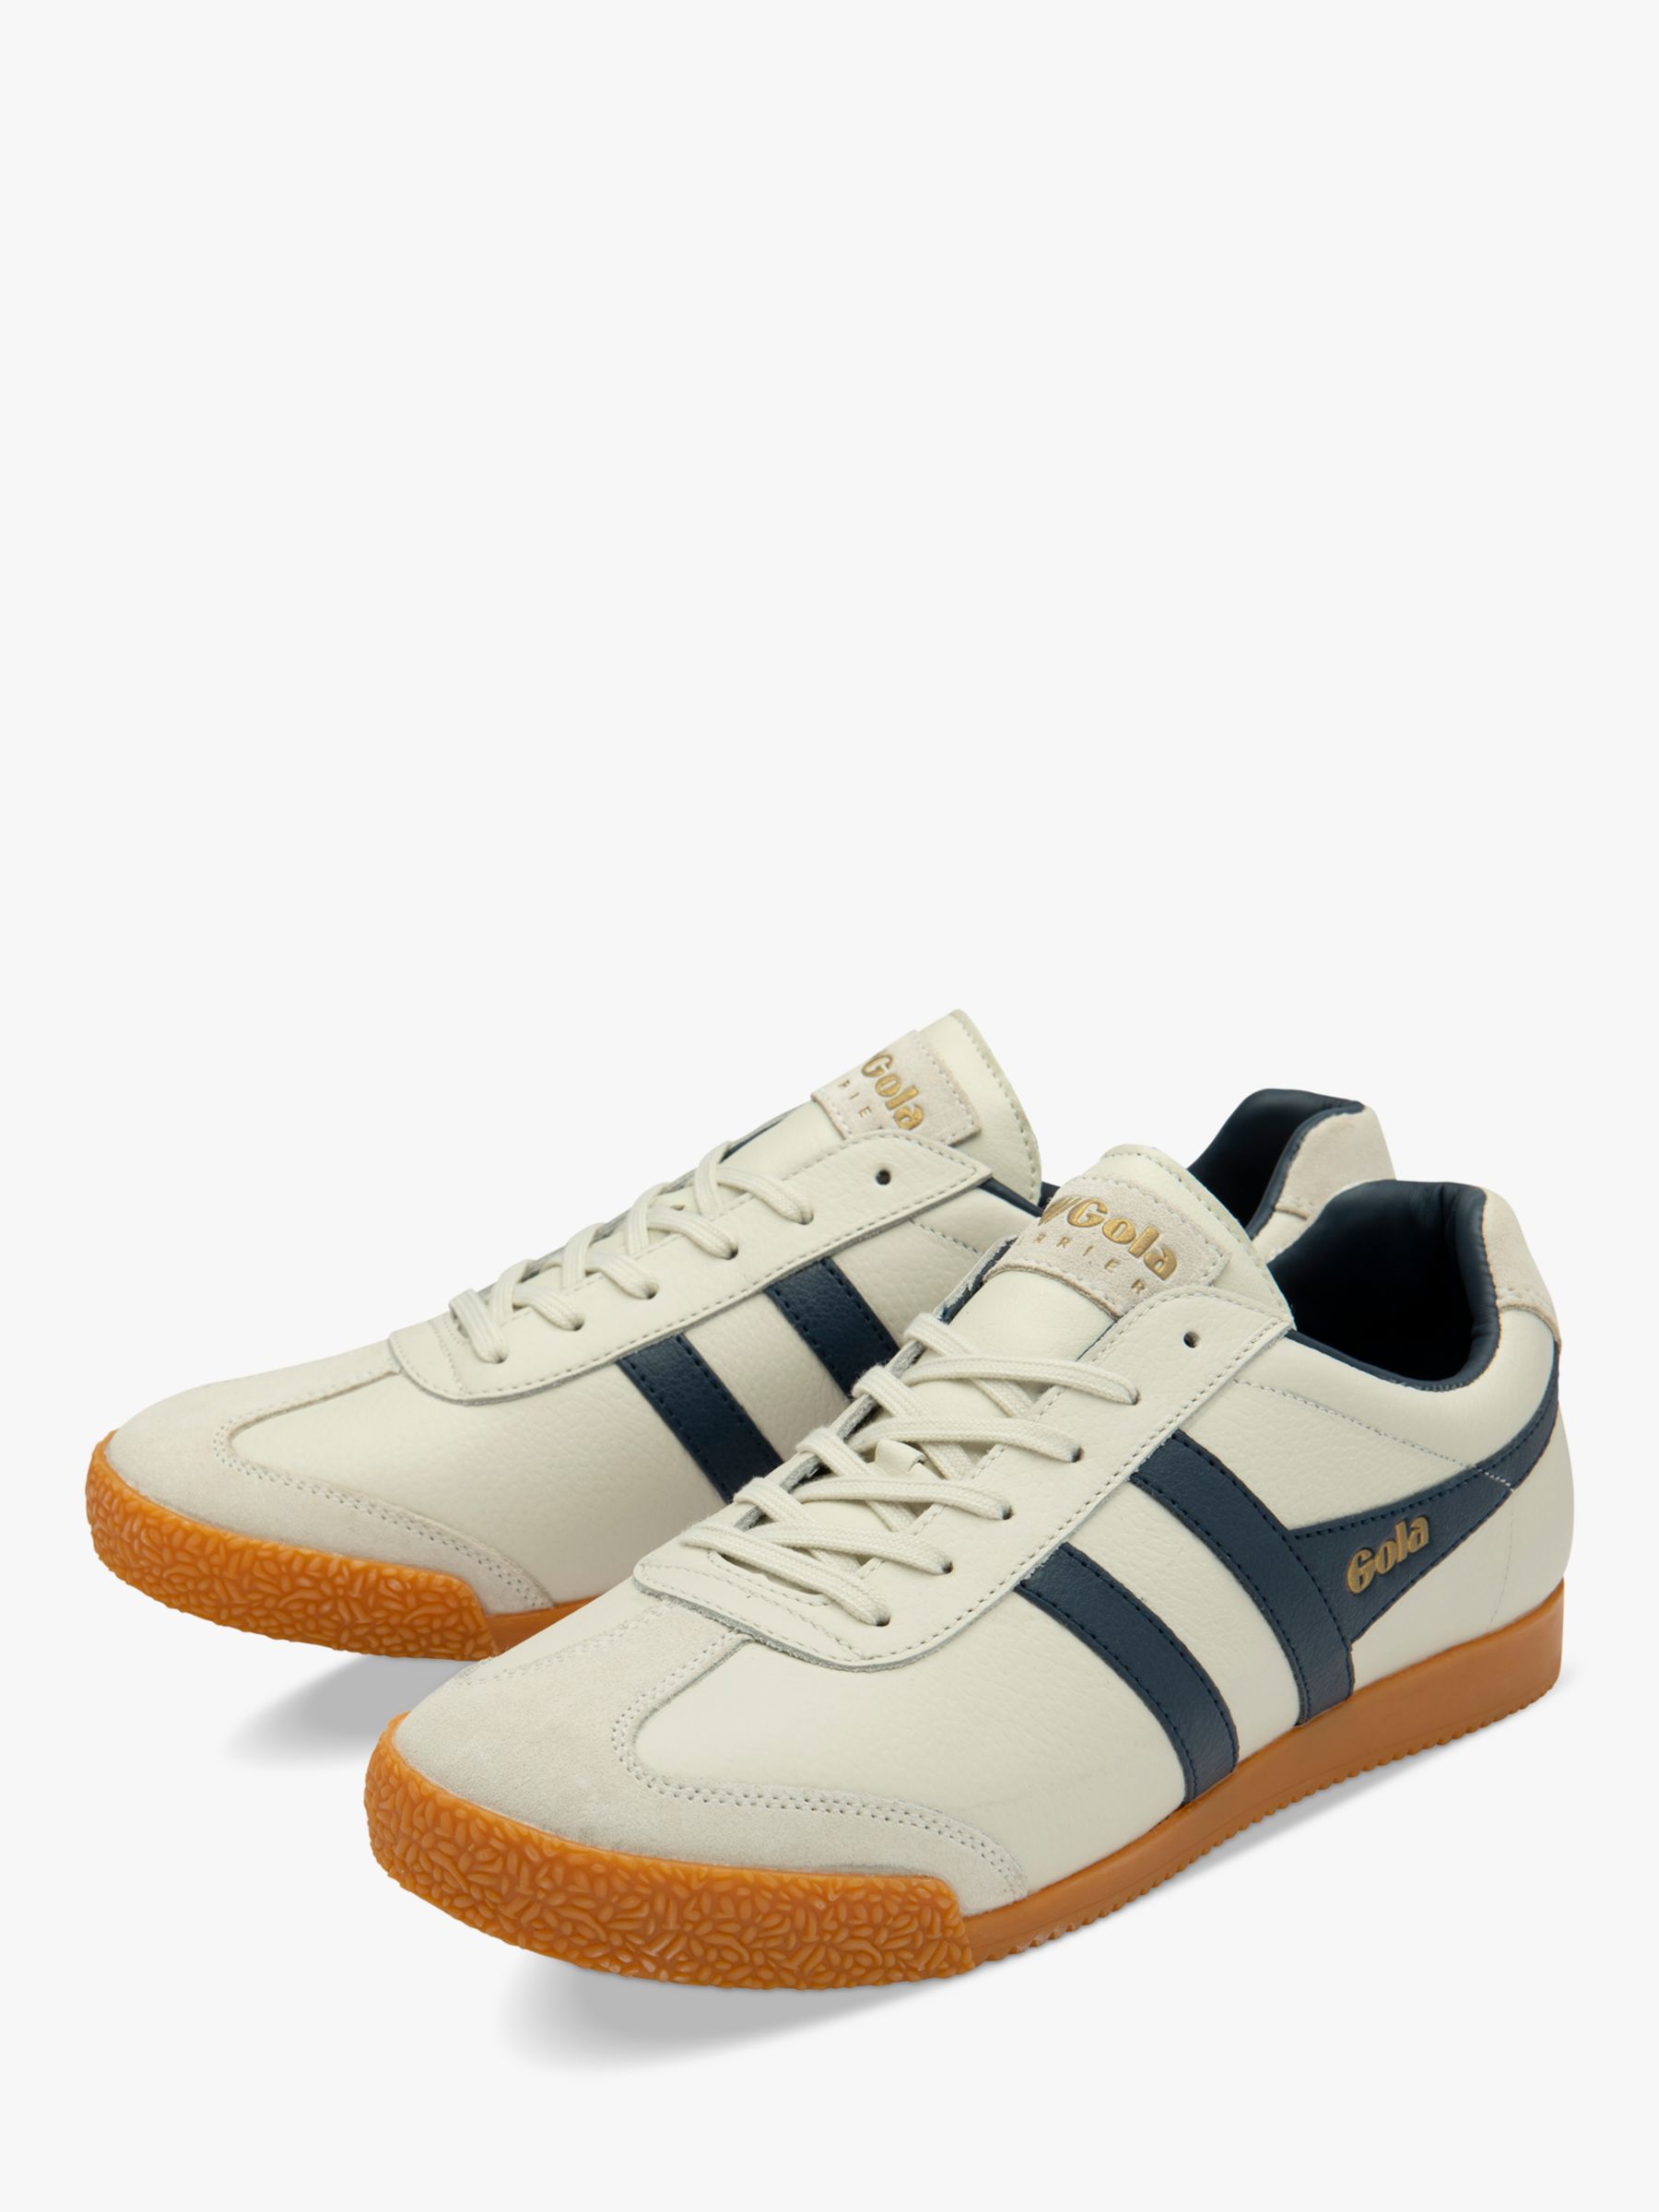 Gola Classics Harrier Leather Lace Up Trainers, Off White/Navy, 12